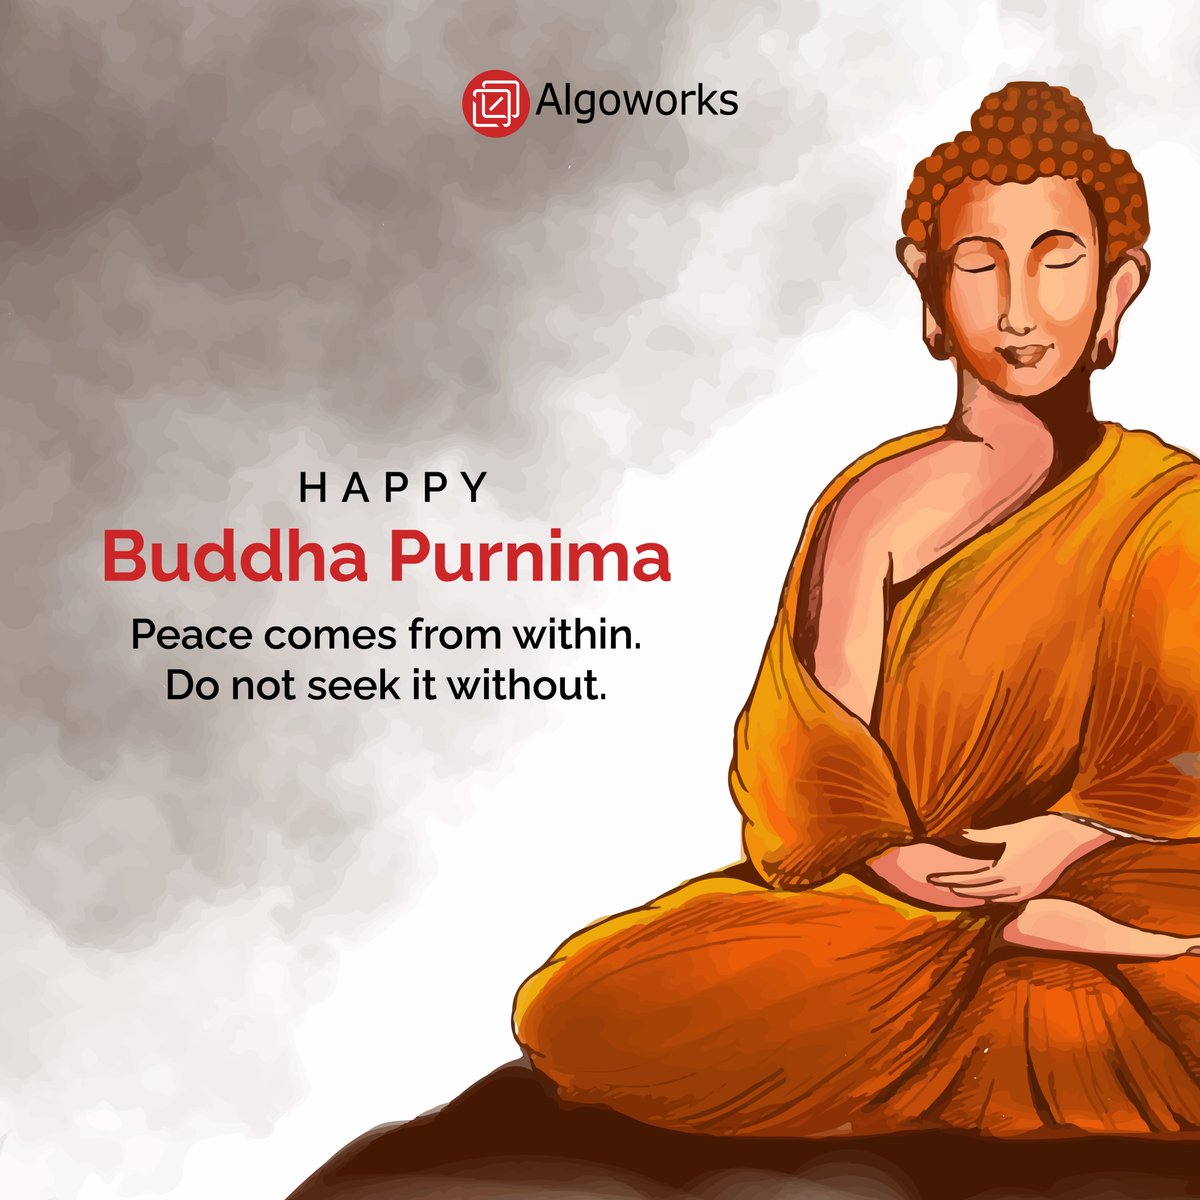 Wishing everyone peace and enlightenment on Buddha Purnima! May the teachings of Buddha guide us towards a path of compassion and wisdom.

#BuddhistGreetings #buddhaseeds #festivals #WisdomAndCompassion